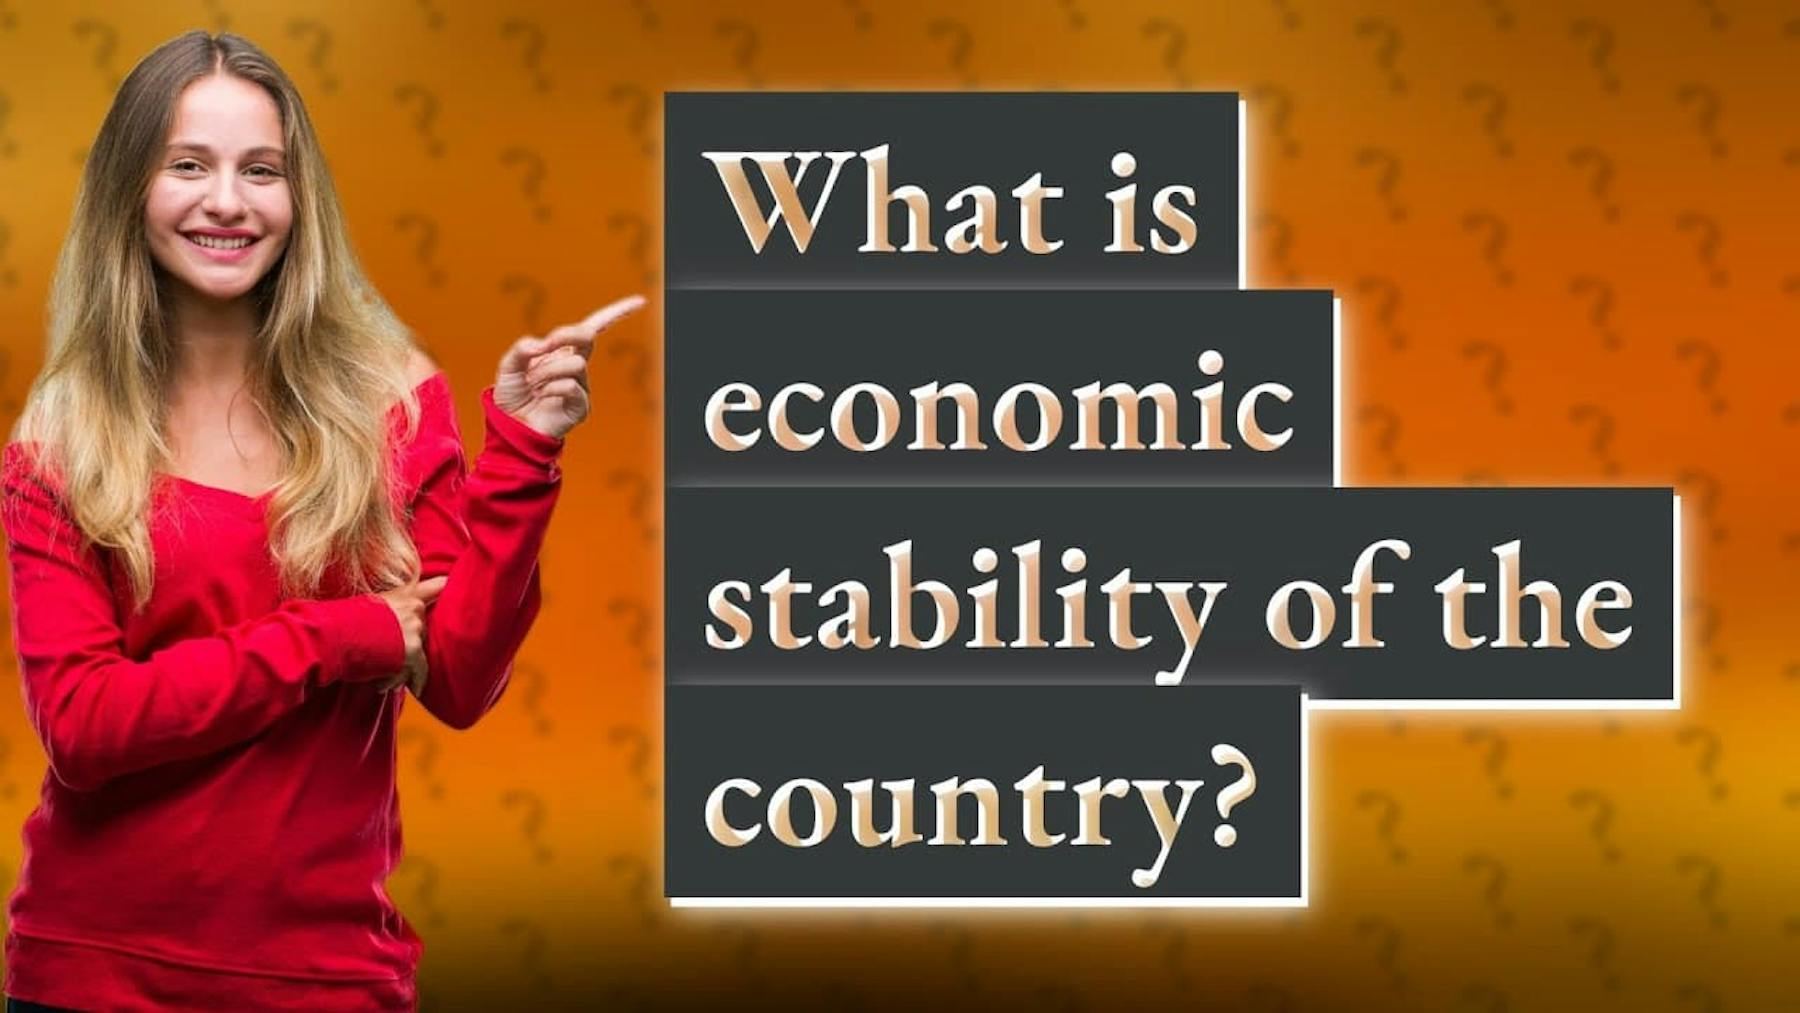 what is economic stability of the country?